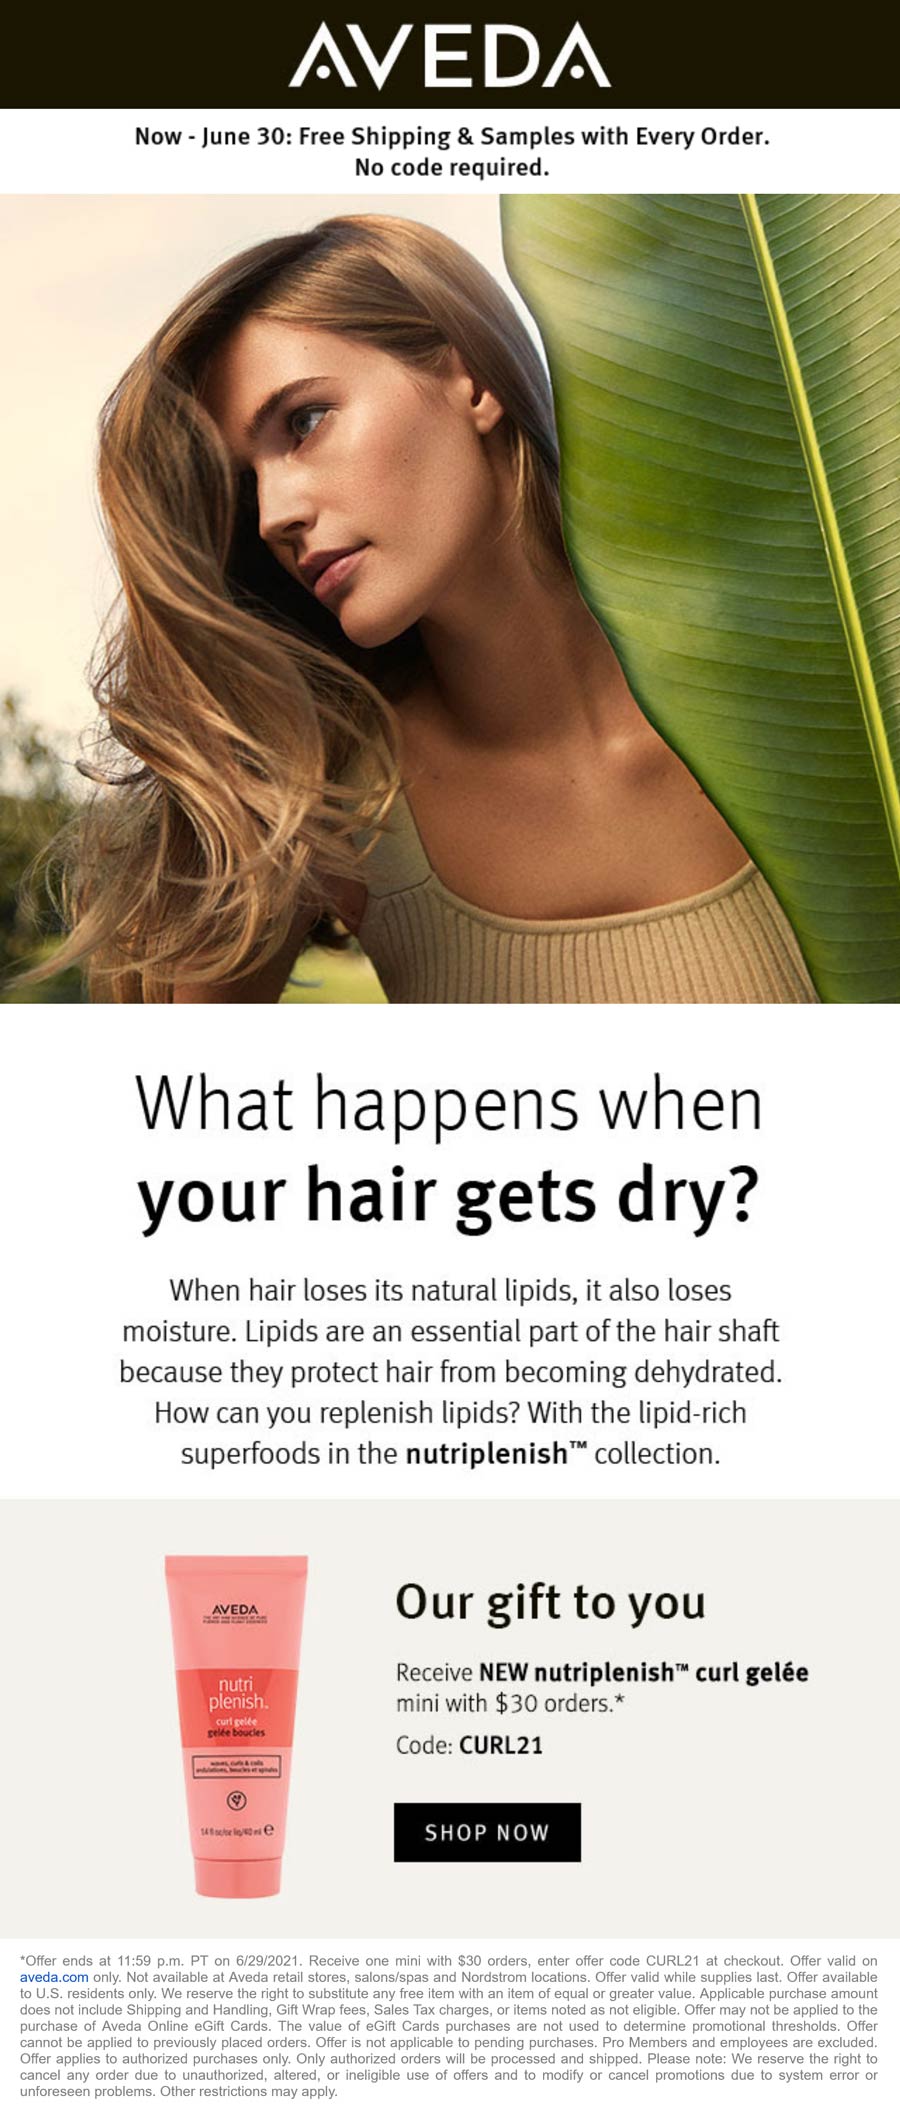 AVEDA stores Coupon  Free nutriplenish curl gelee with $30 spent today at AVEDA via promo code CURL21 #aveda 